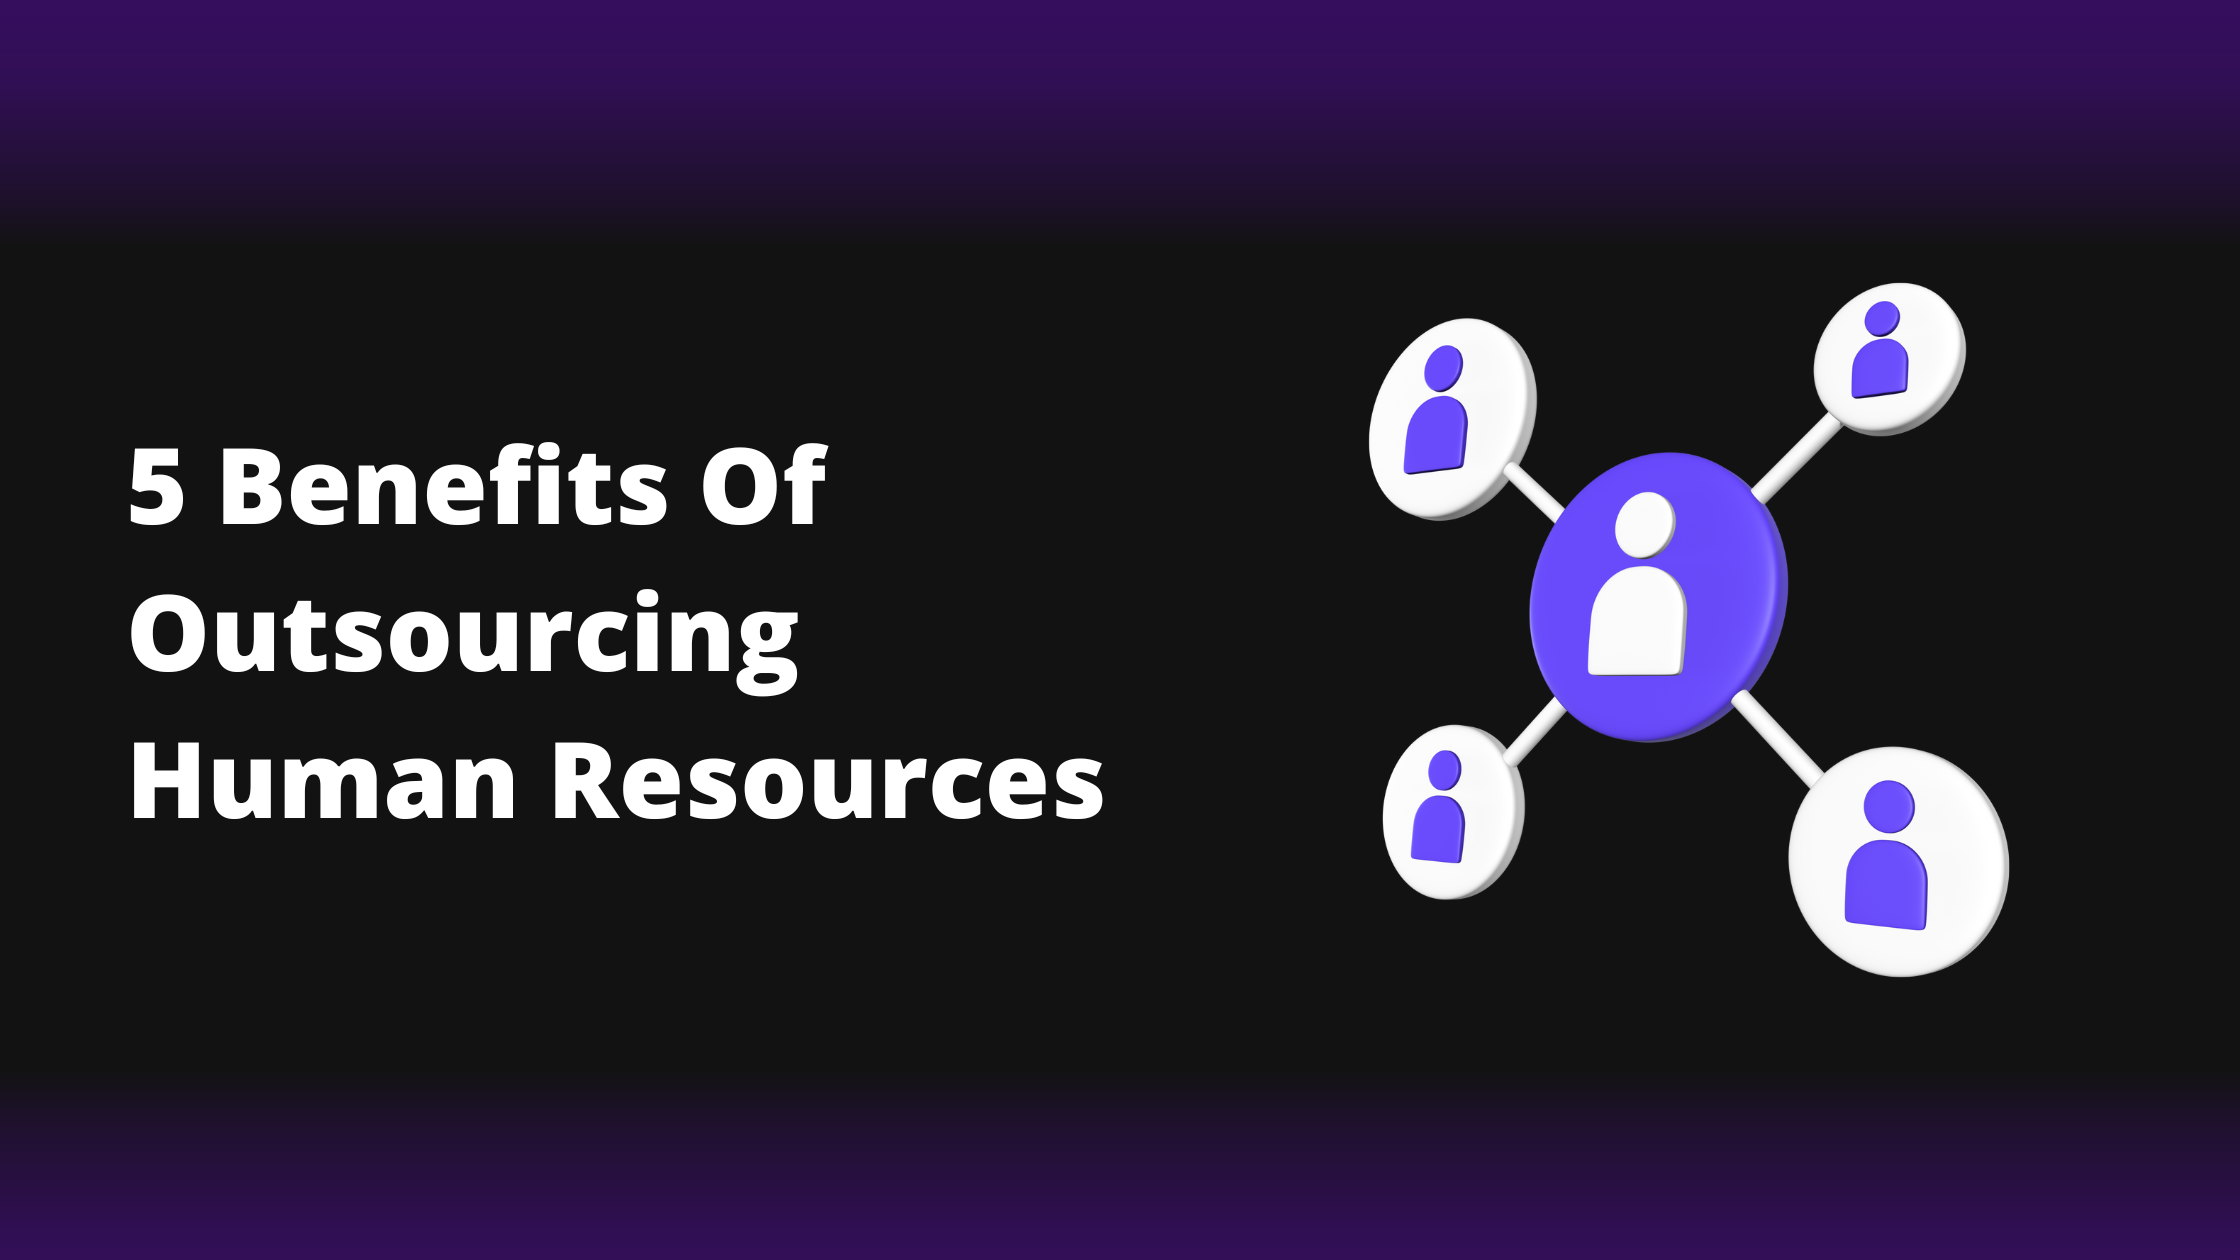 5 Benefits Of Outsourcing Human Resources